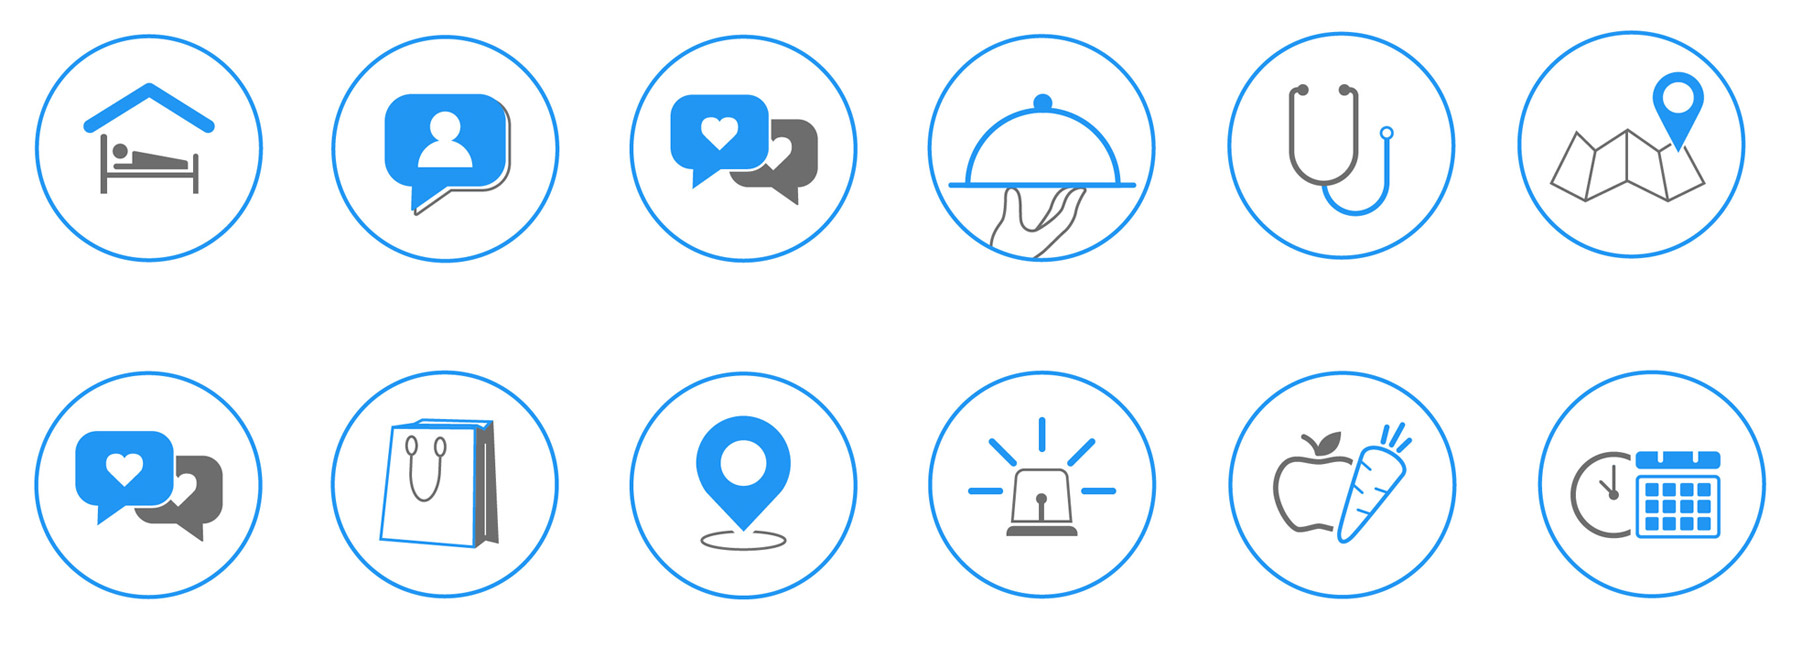 Icons design for app